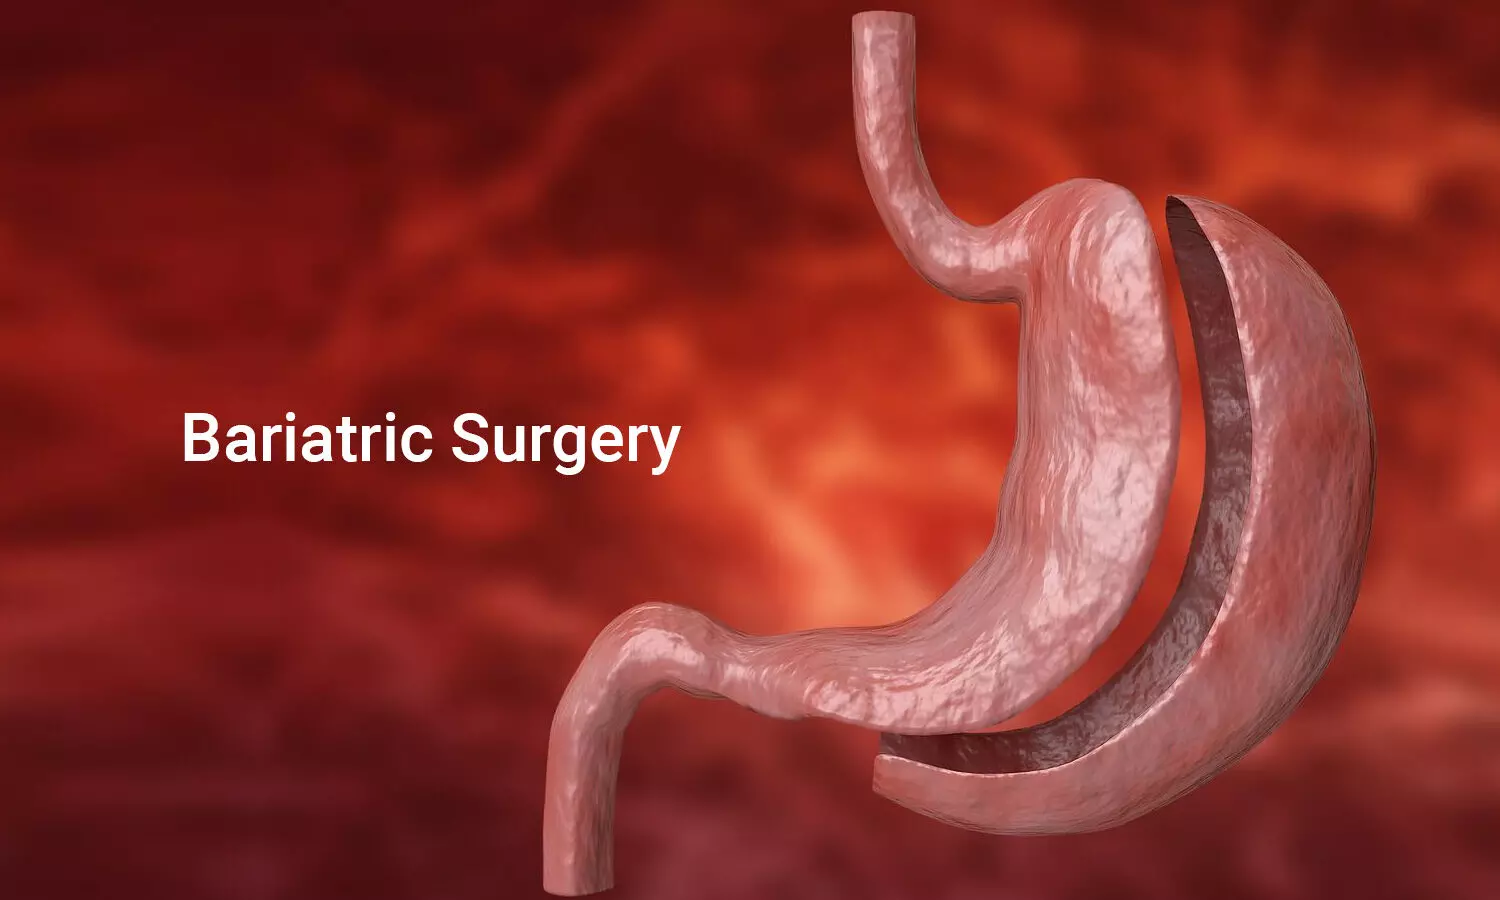 Portal venous system thrombosis after bariatric surgery rare but lethal: Study